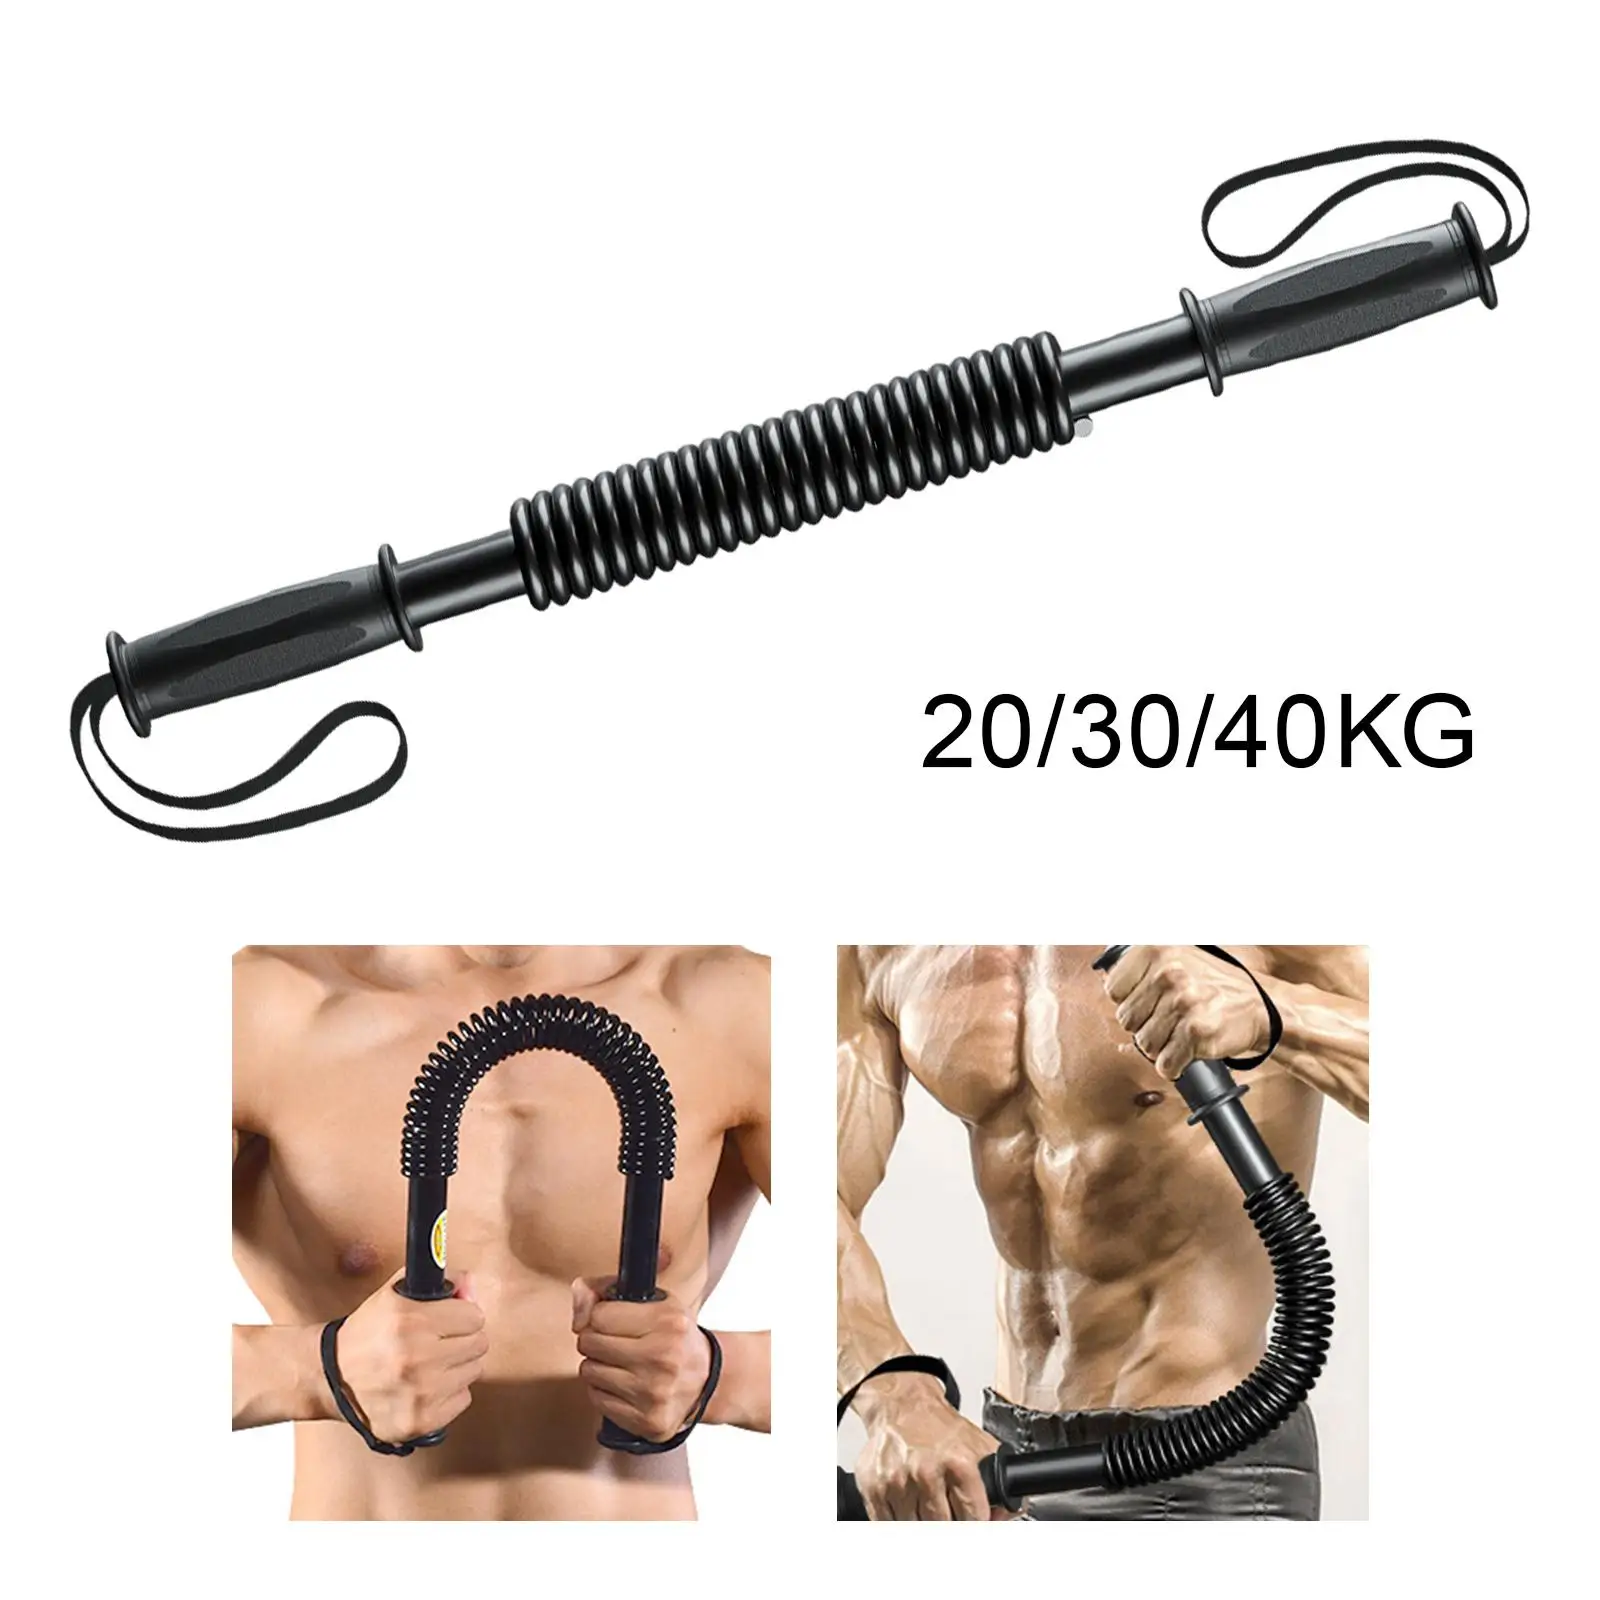 Chest Expander Workout Equipment Upper Body Exercise Spring Power Twister Bar for Trainer Forearm Muscle Pulling Women Men Back